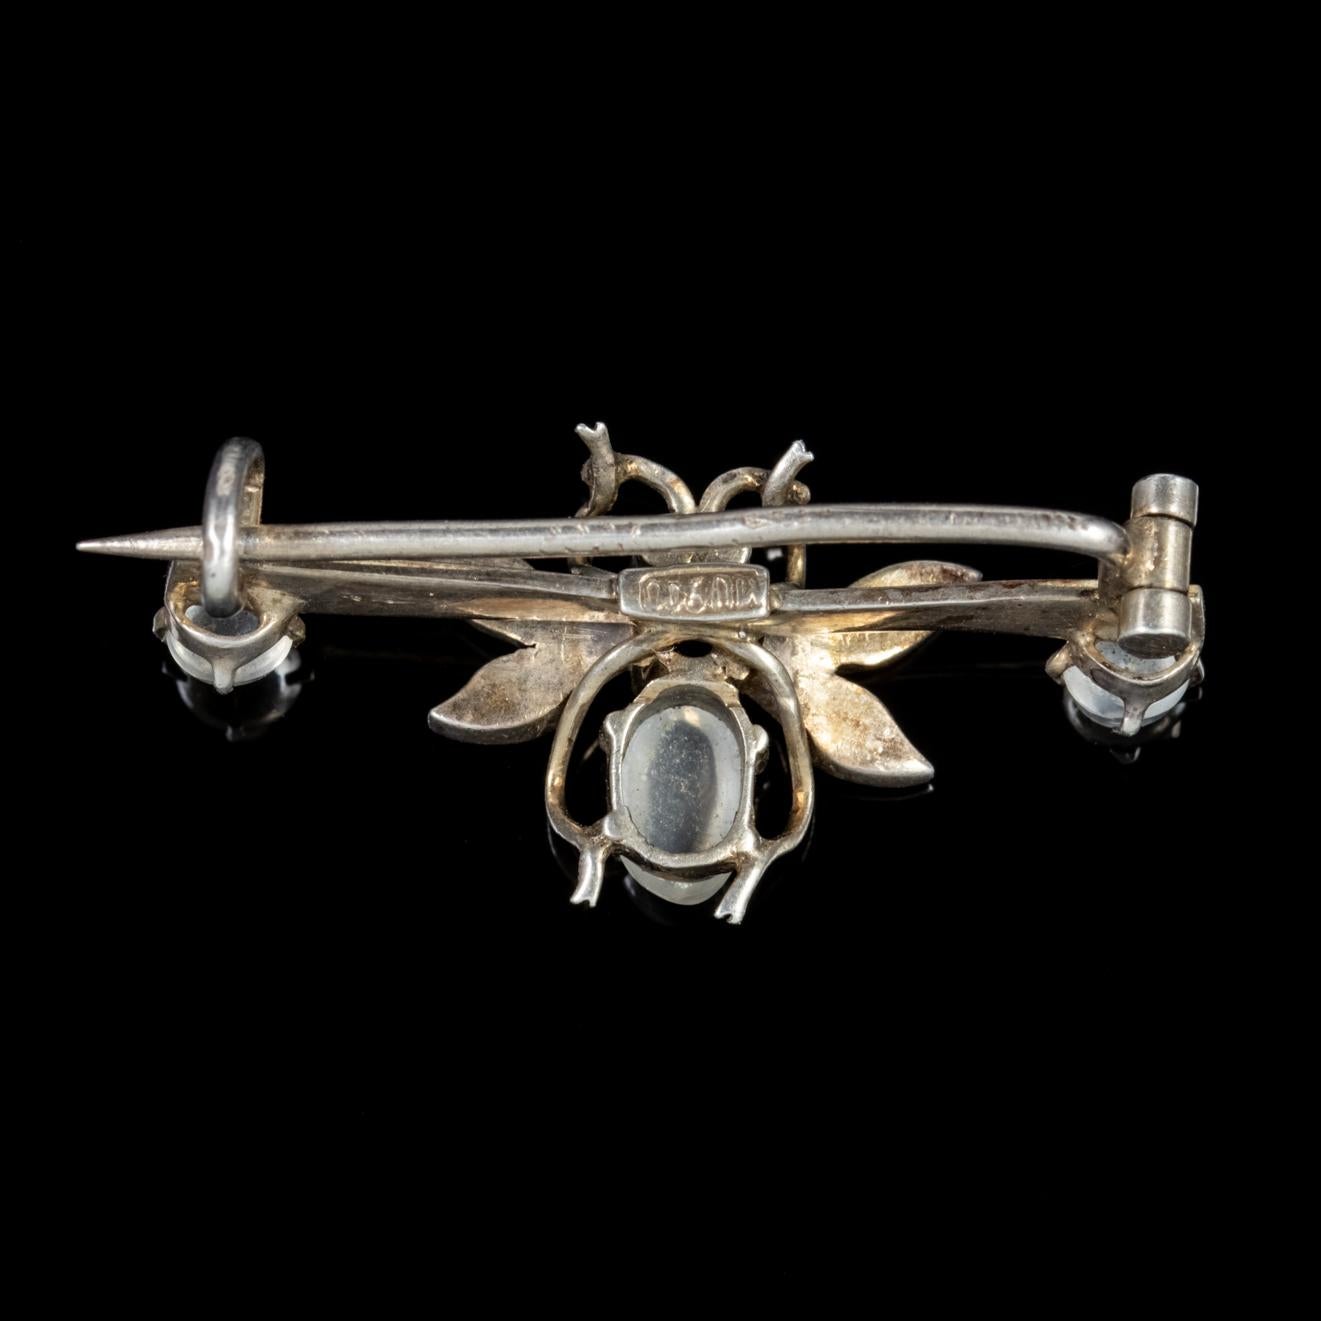 A delightful little antique Victorian brooch featuring a winged insect in the centre made up of lovely Moonstones with Pearl studded wings and red Paste eyes. 

The Moonstones have a lovely ghostly hue and a luminous surface similar to that of